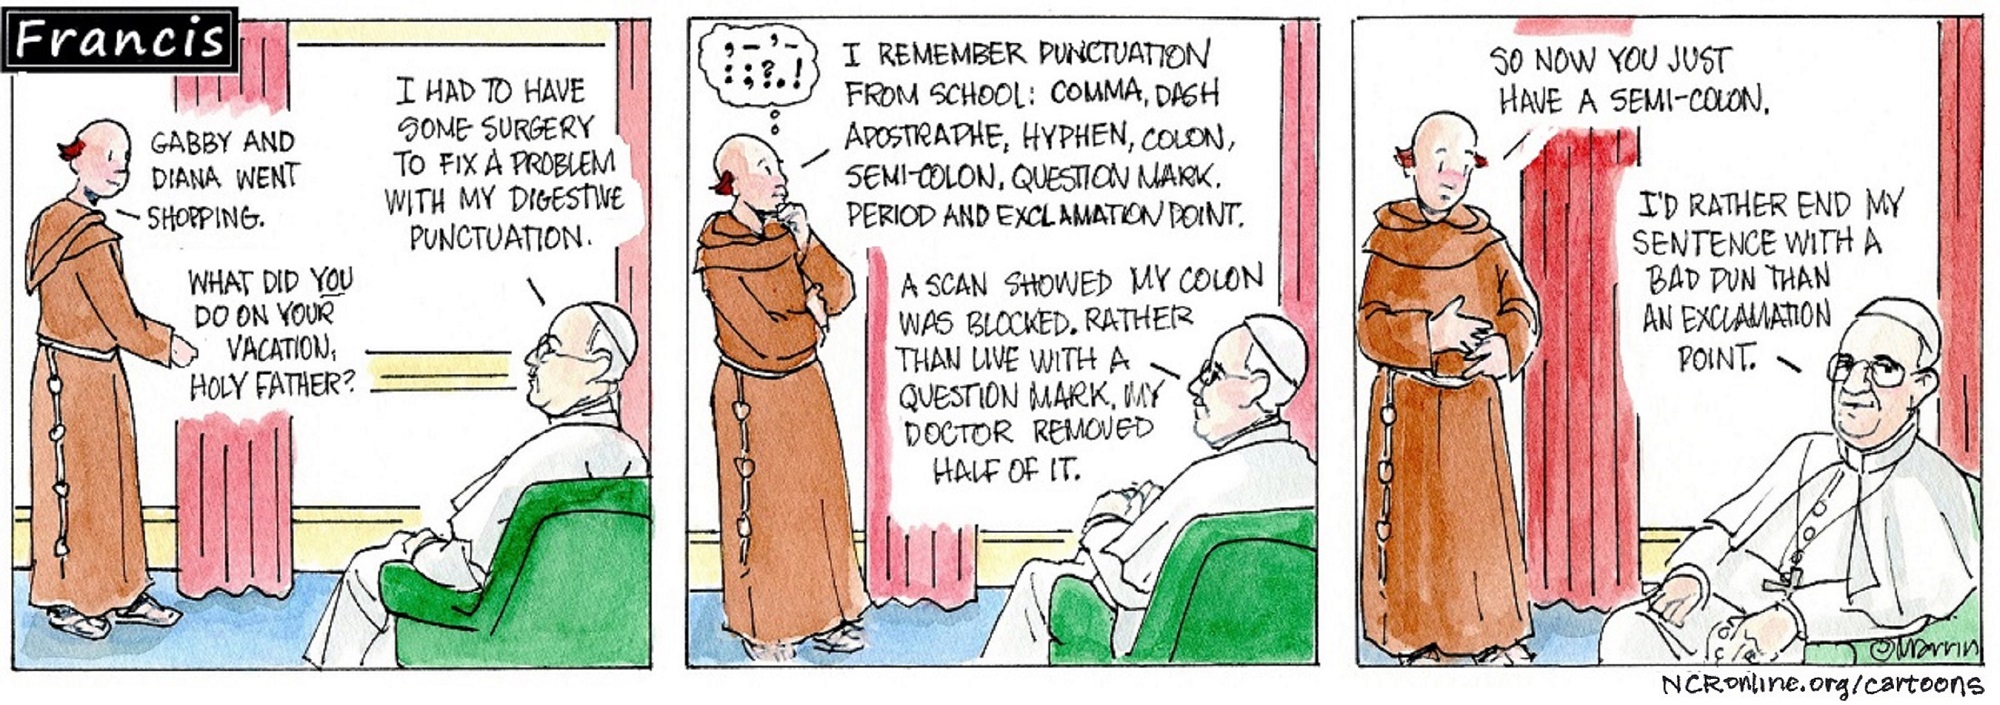 Francis, the comic strip: Brother Leo questions Francis about his recent surgery